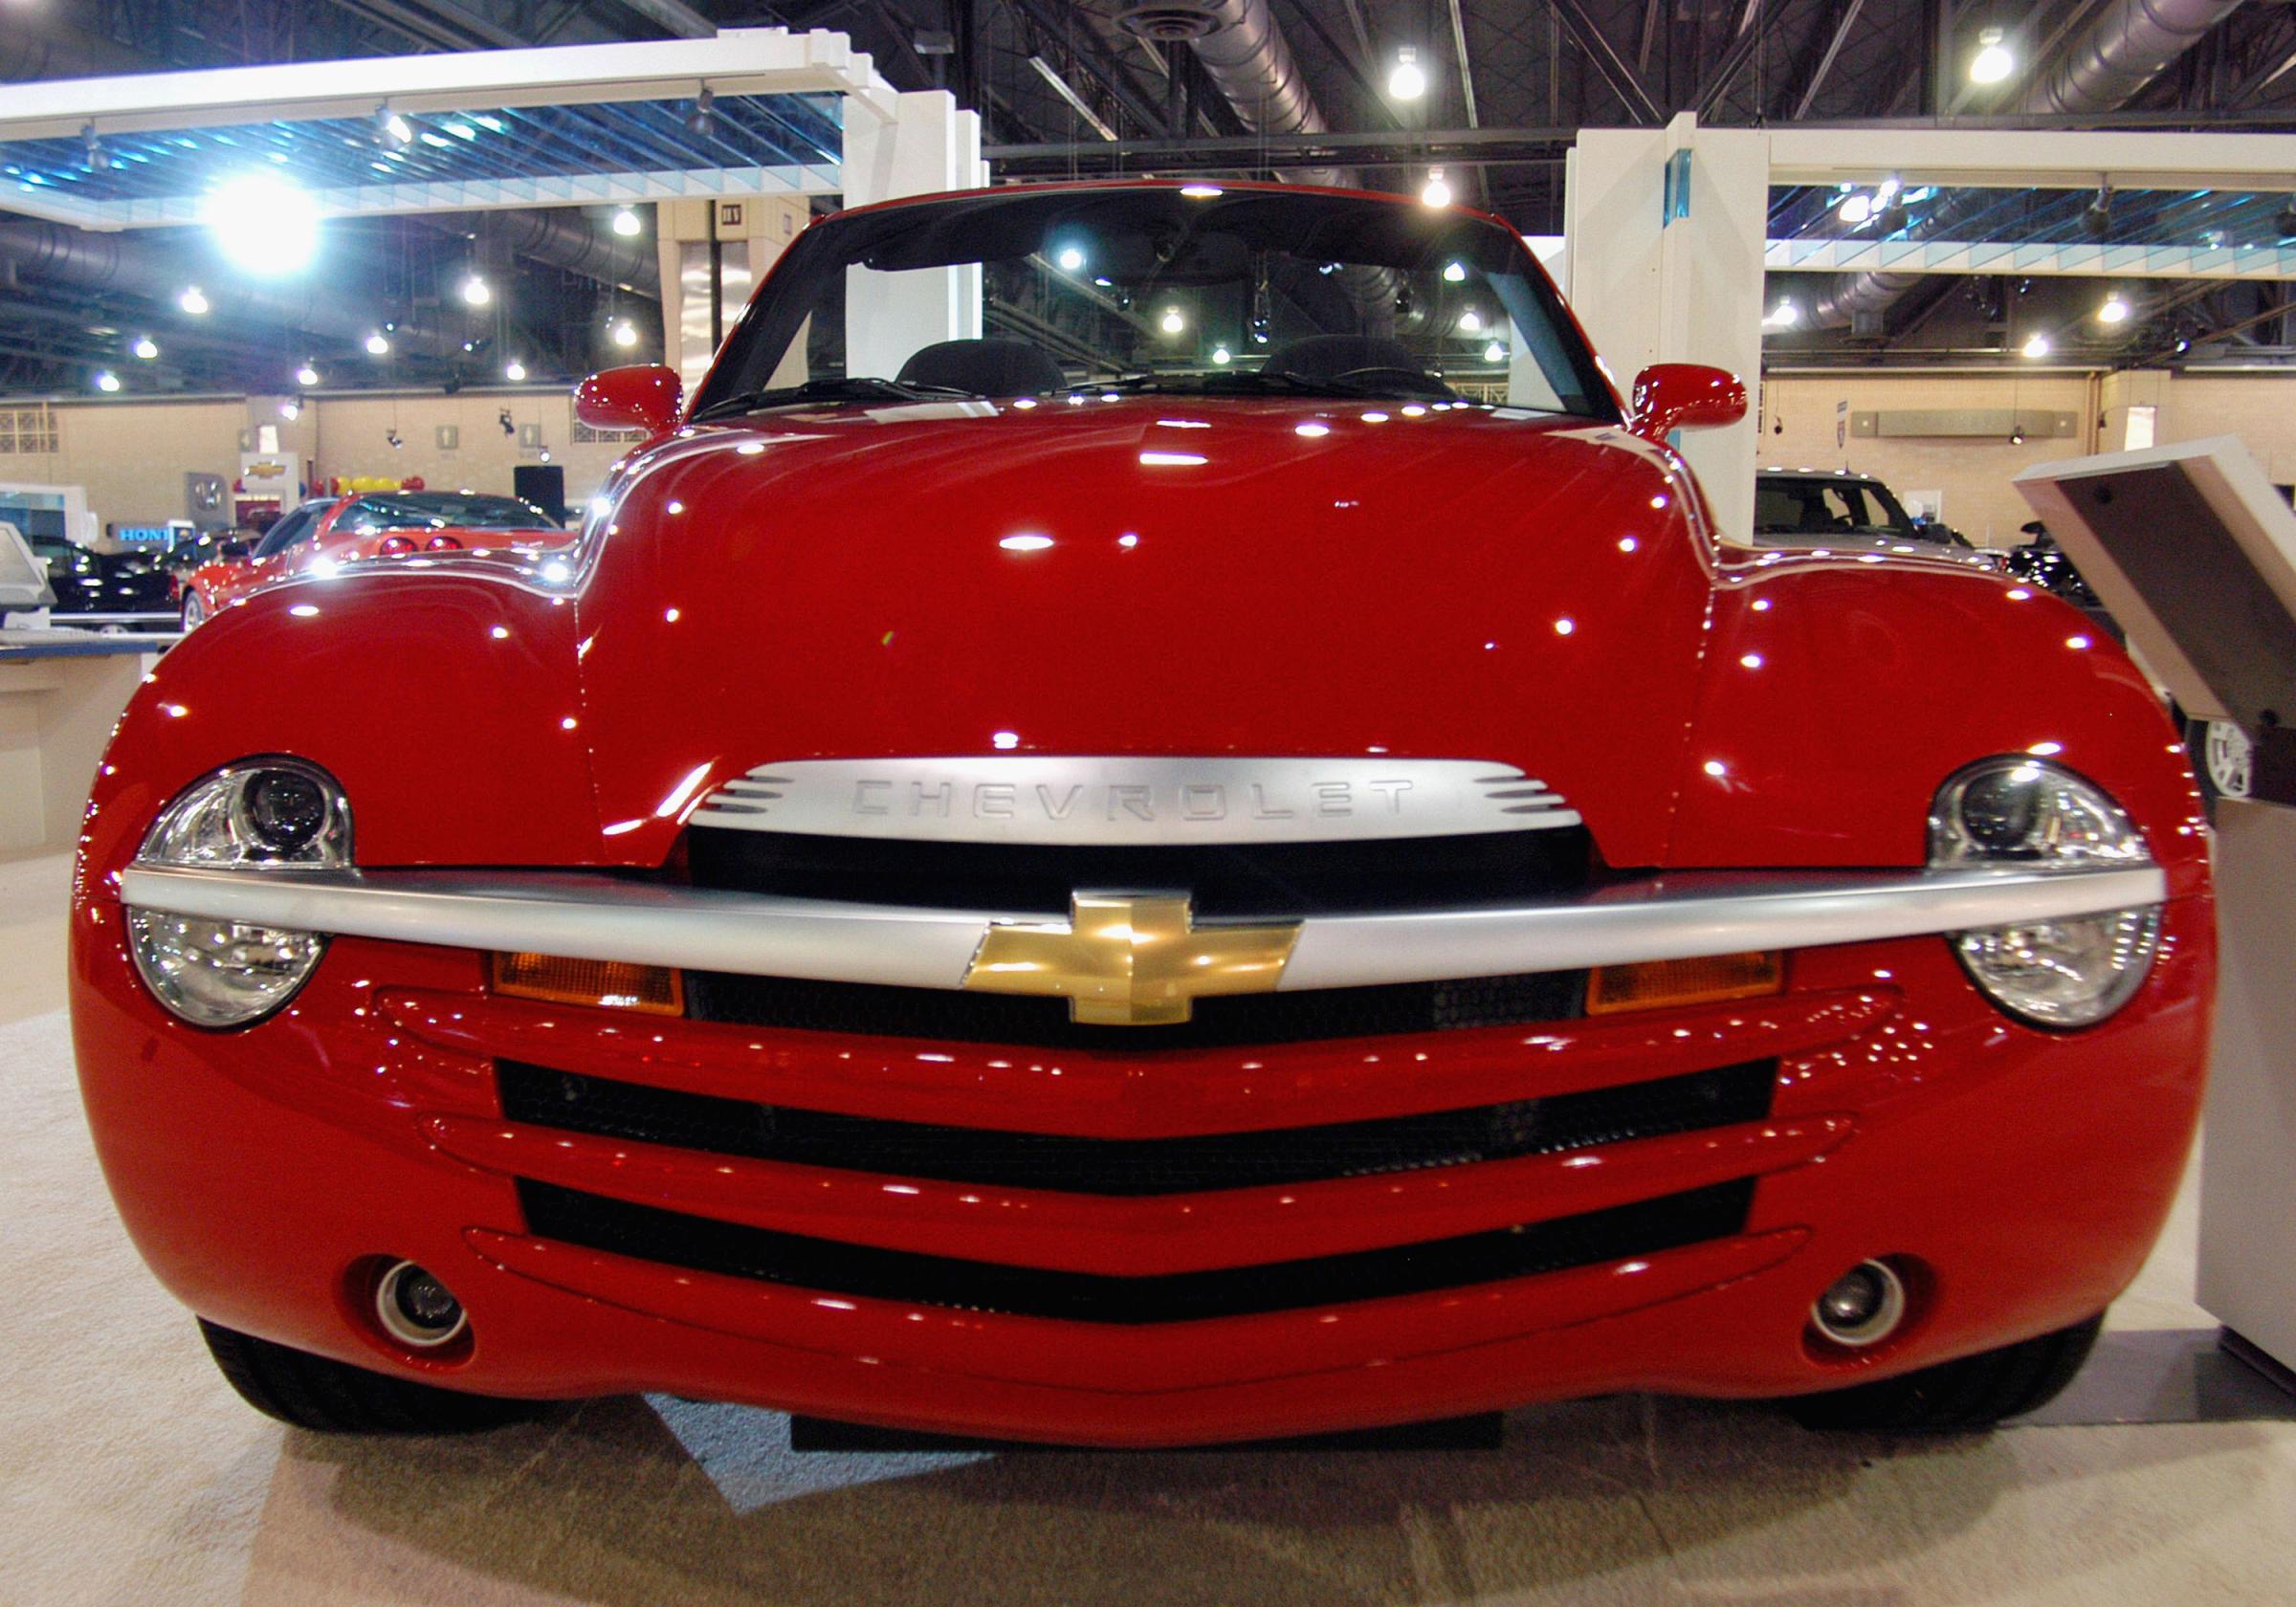 Philadelphia Car Show Revs Up For The Weekend